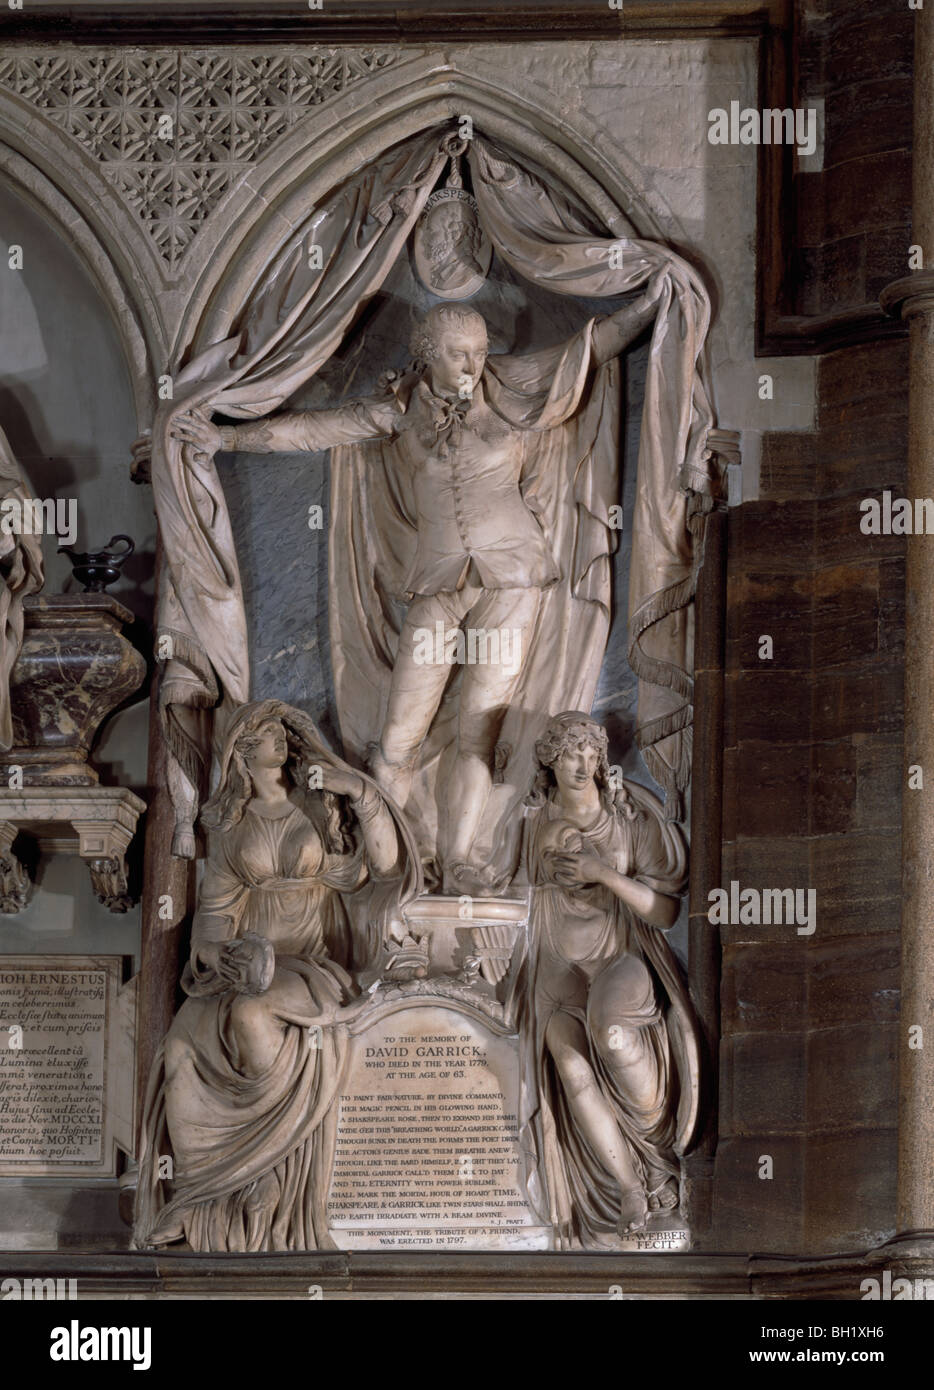 Westminster Abbey monument to David Garrick died 1779 by H Webber, showing actor taking final curtain call. London England Stock Photo